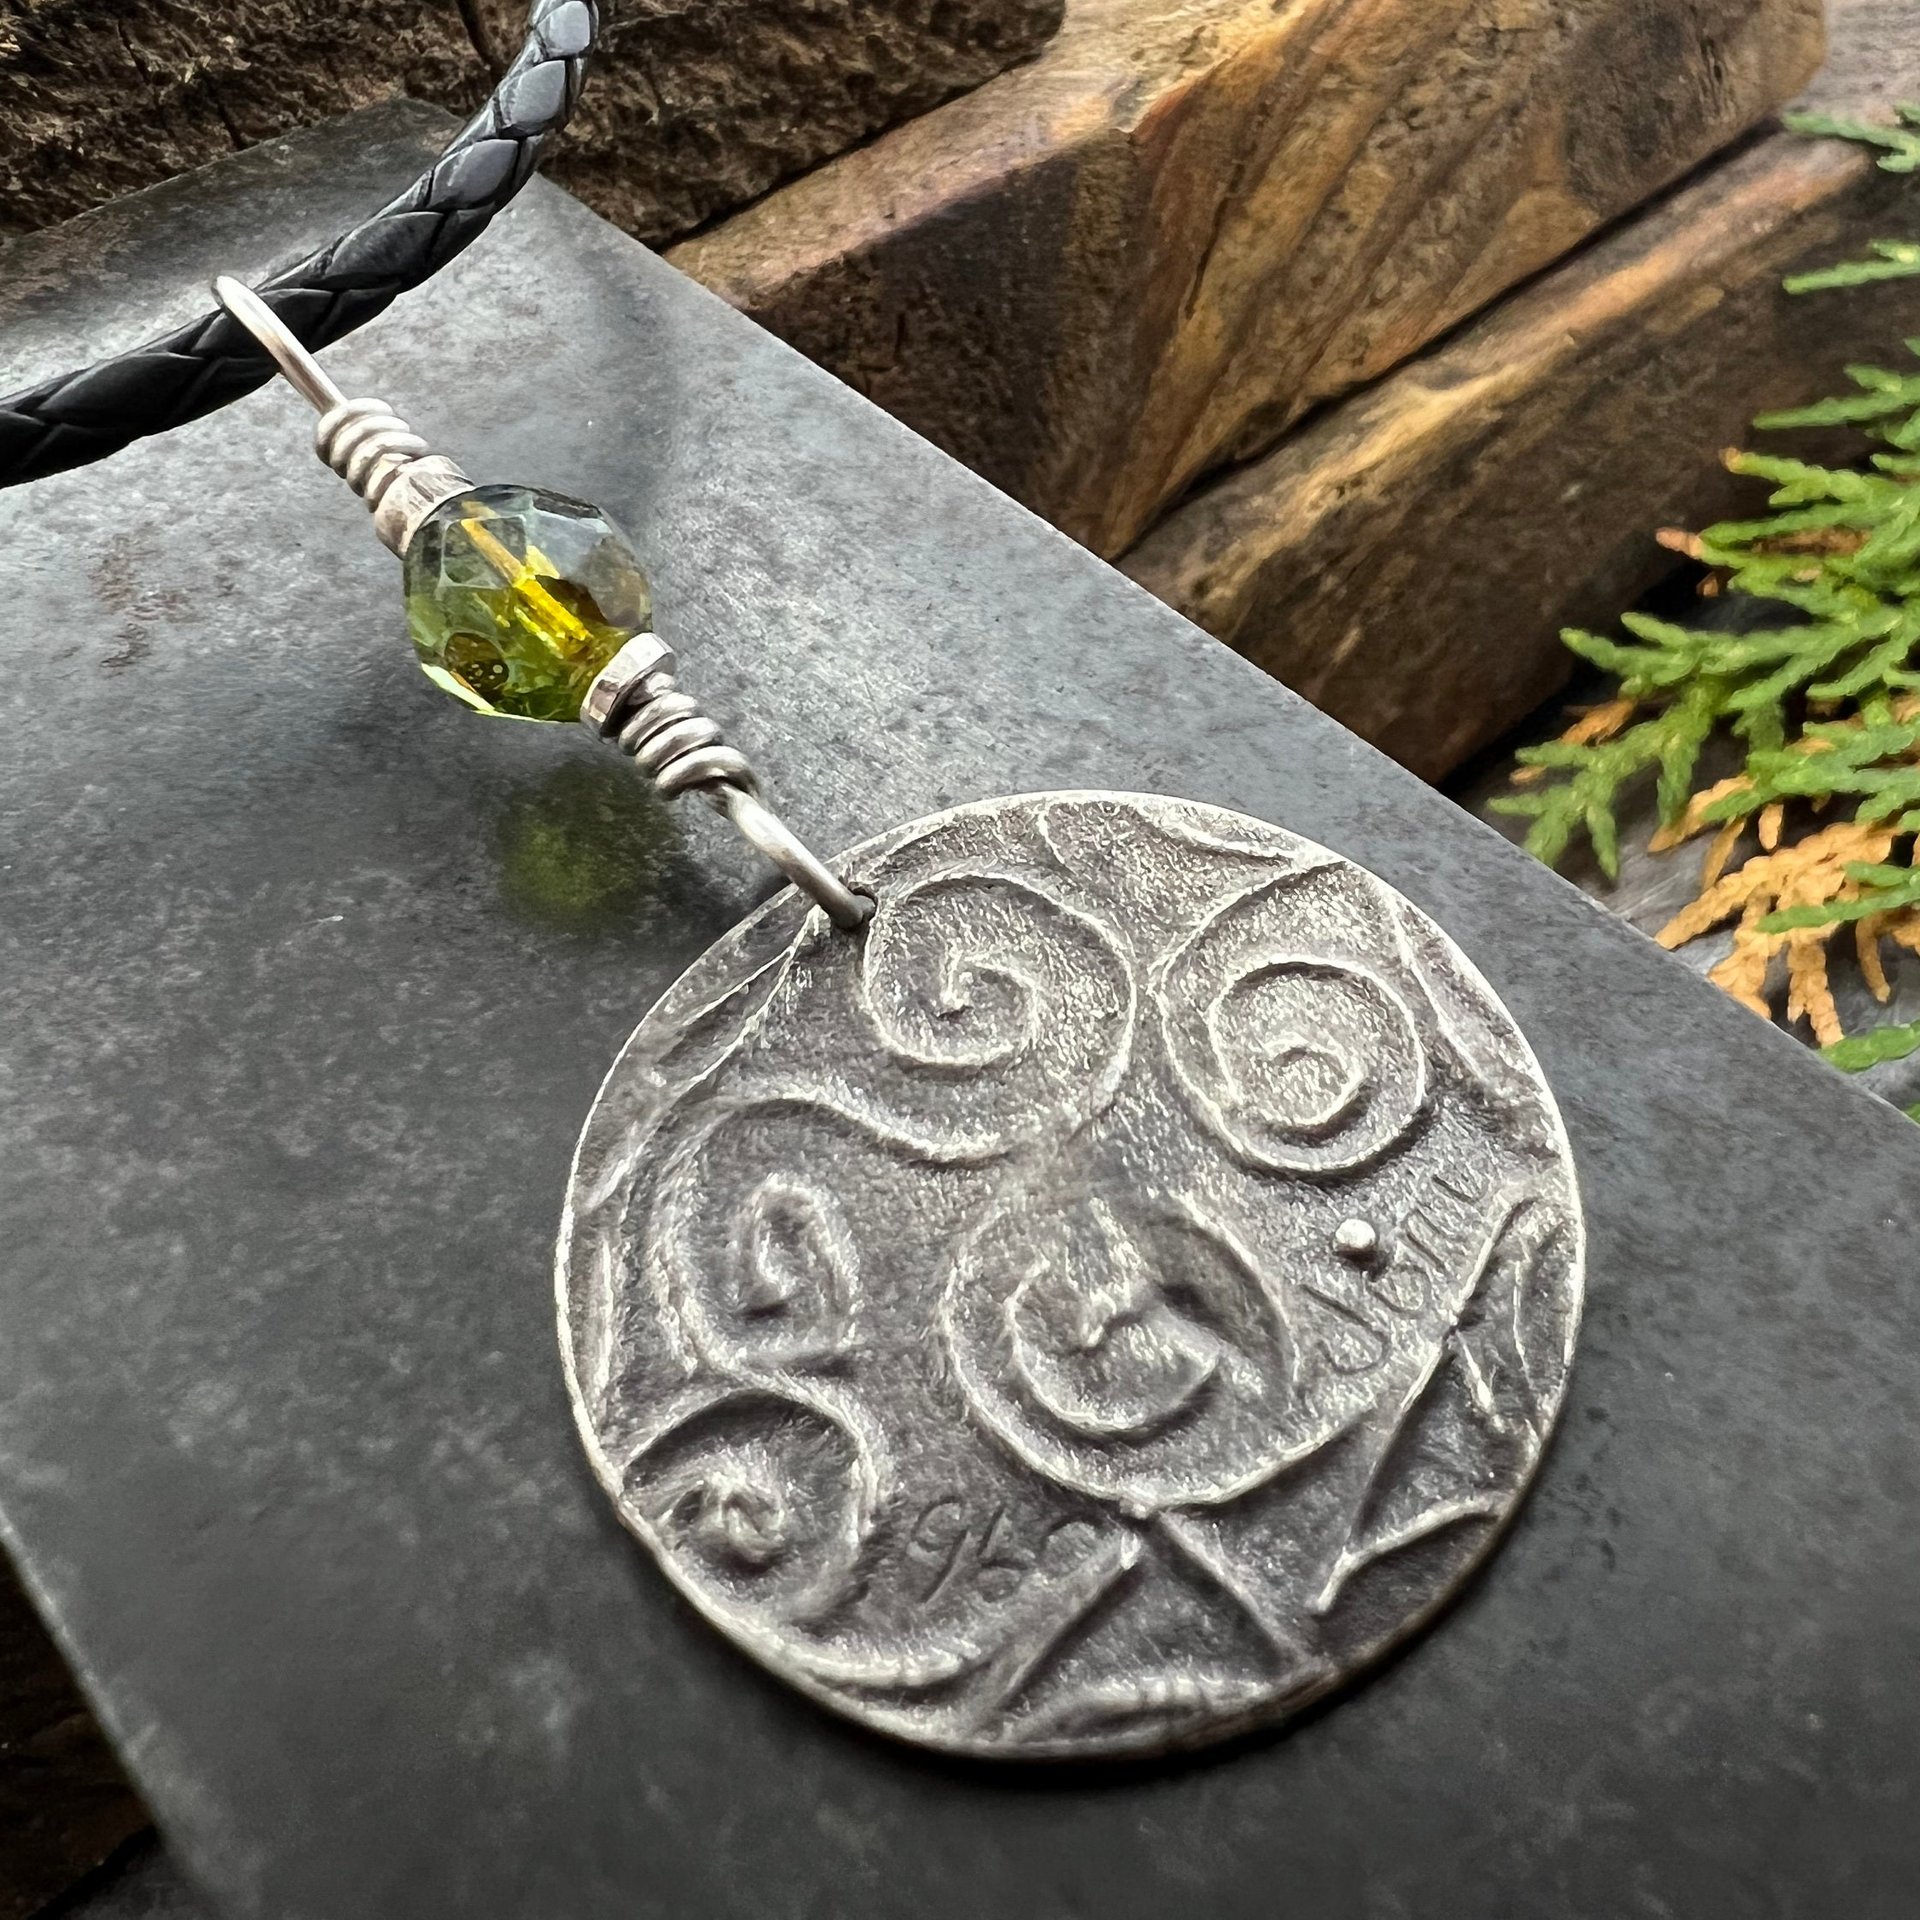 Celtic Tree of Life Pendant, Sterling Silver, Green Czech Glass, Sacred Celtic Tree, Irish Celtic Spirals, Druid Dryad, Crann Bethadh, Witch